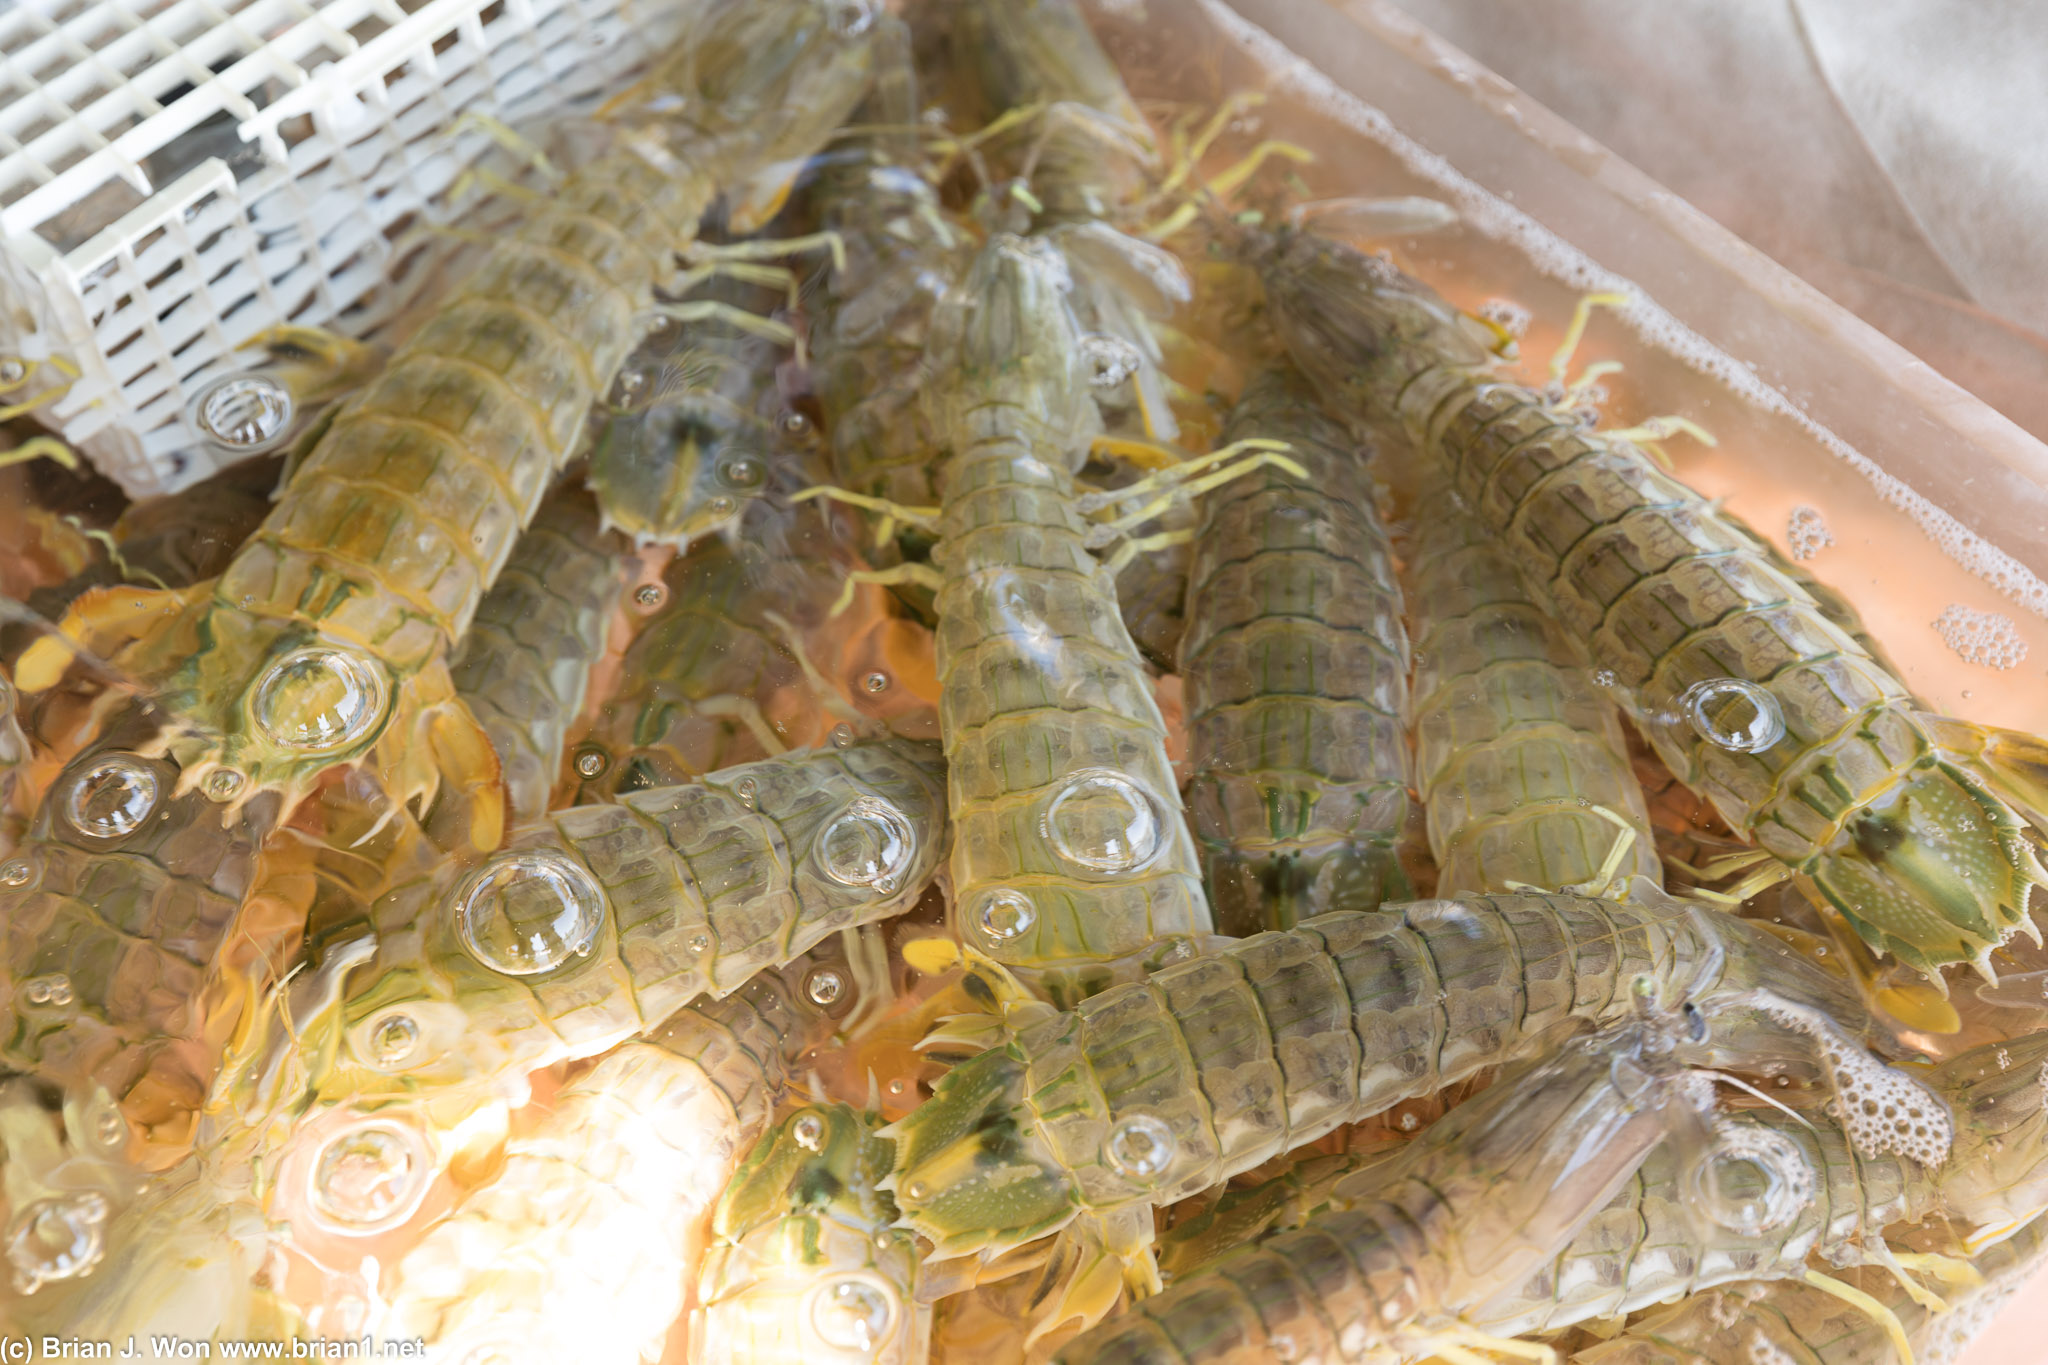 Mantis shrimp. Supposedly about 750g (almost 1.5lb) each?